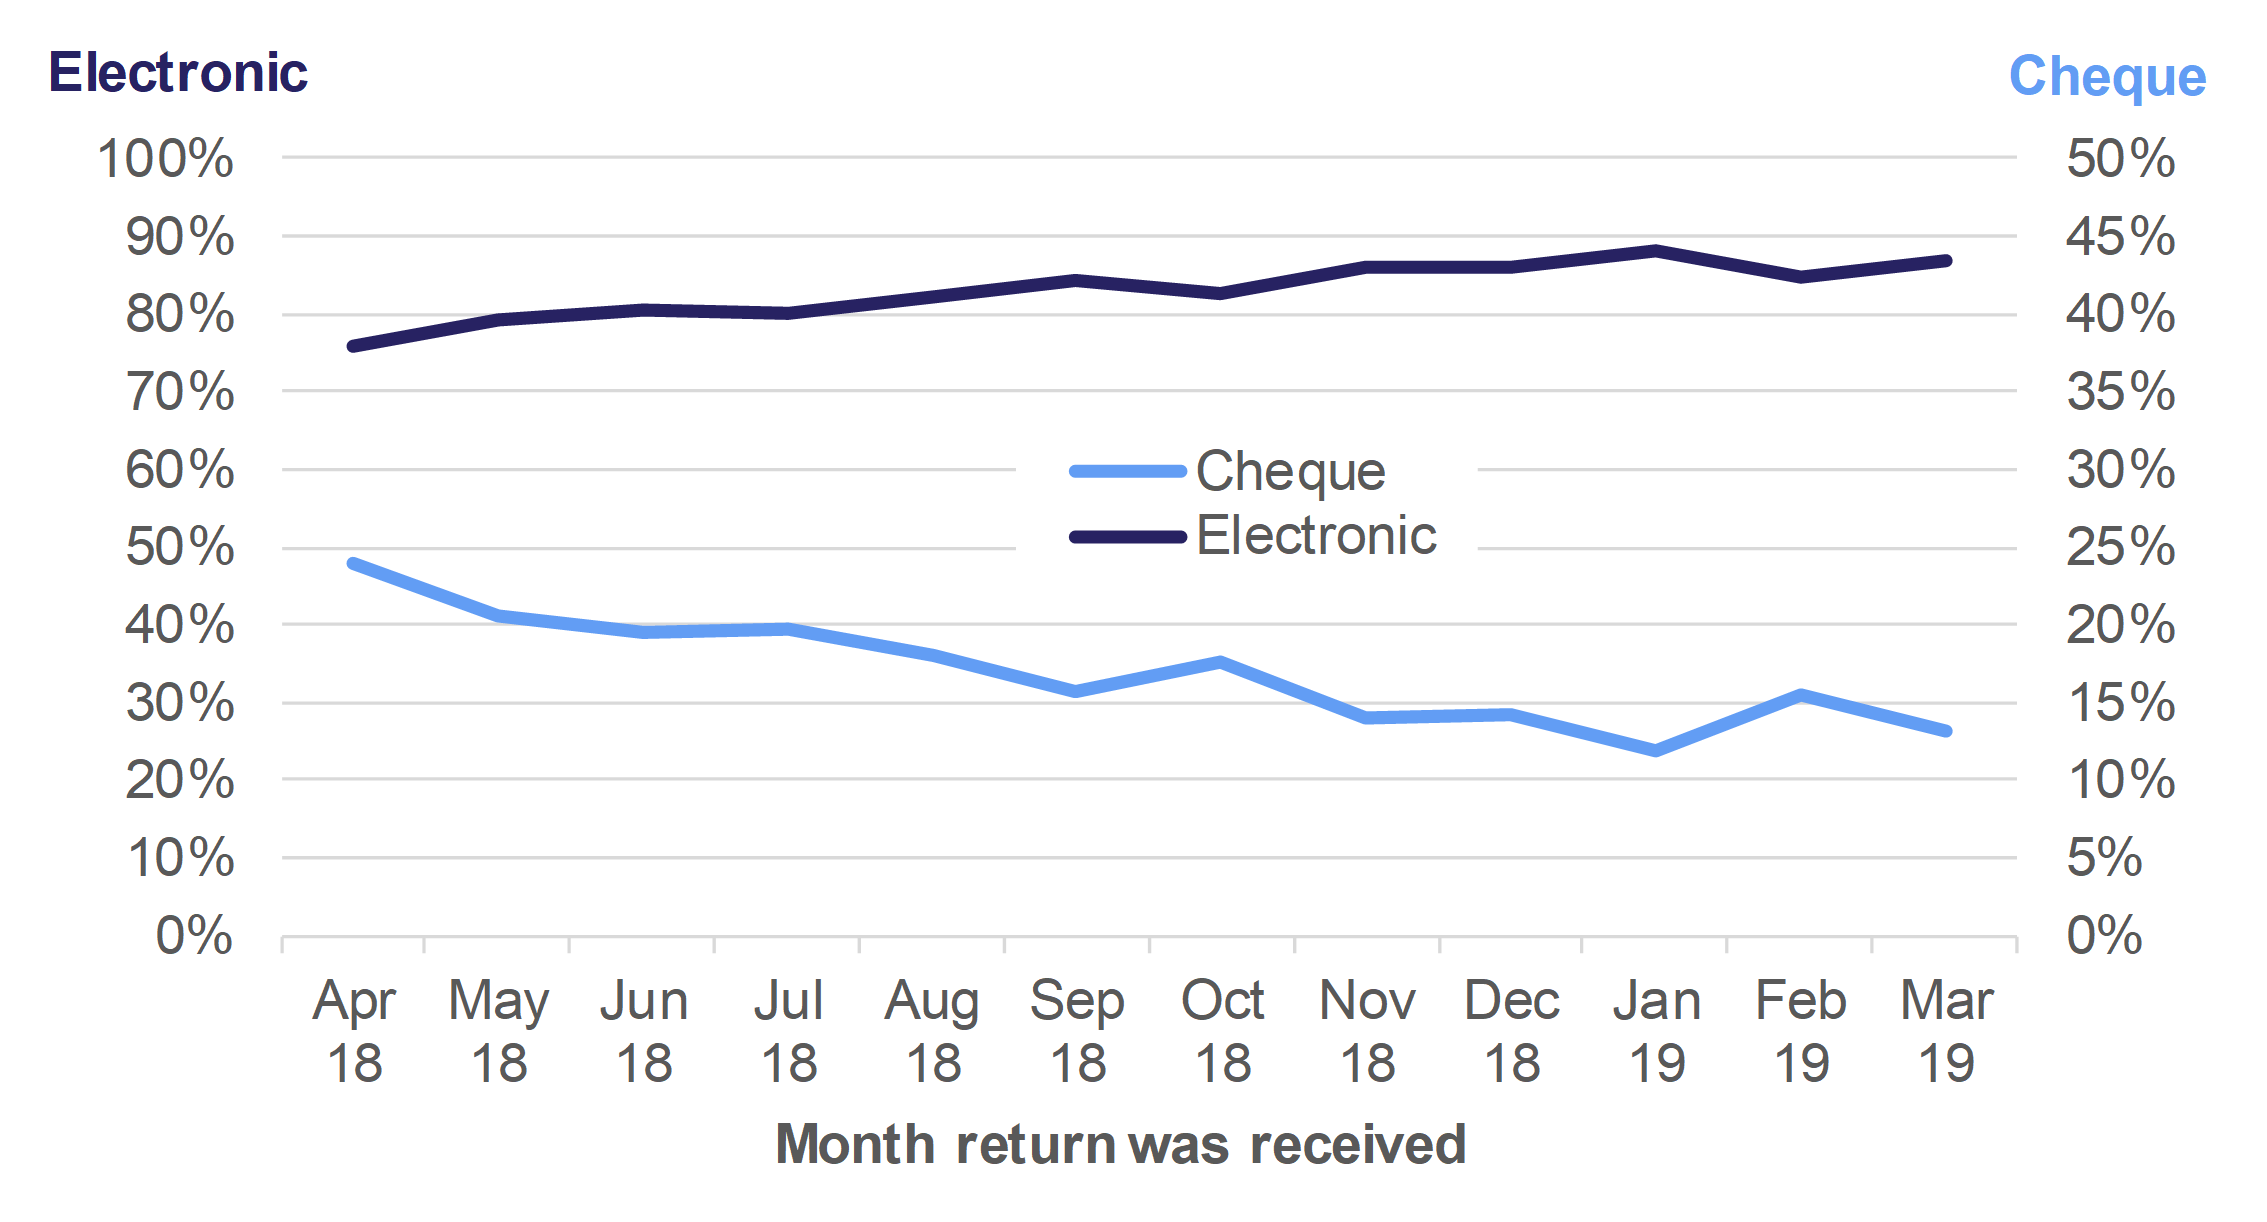 Figure 10.1 shows the monthly trend in the percentage of payments received electronically or by cheque, for returns received in April 2018 to March 2019. 